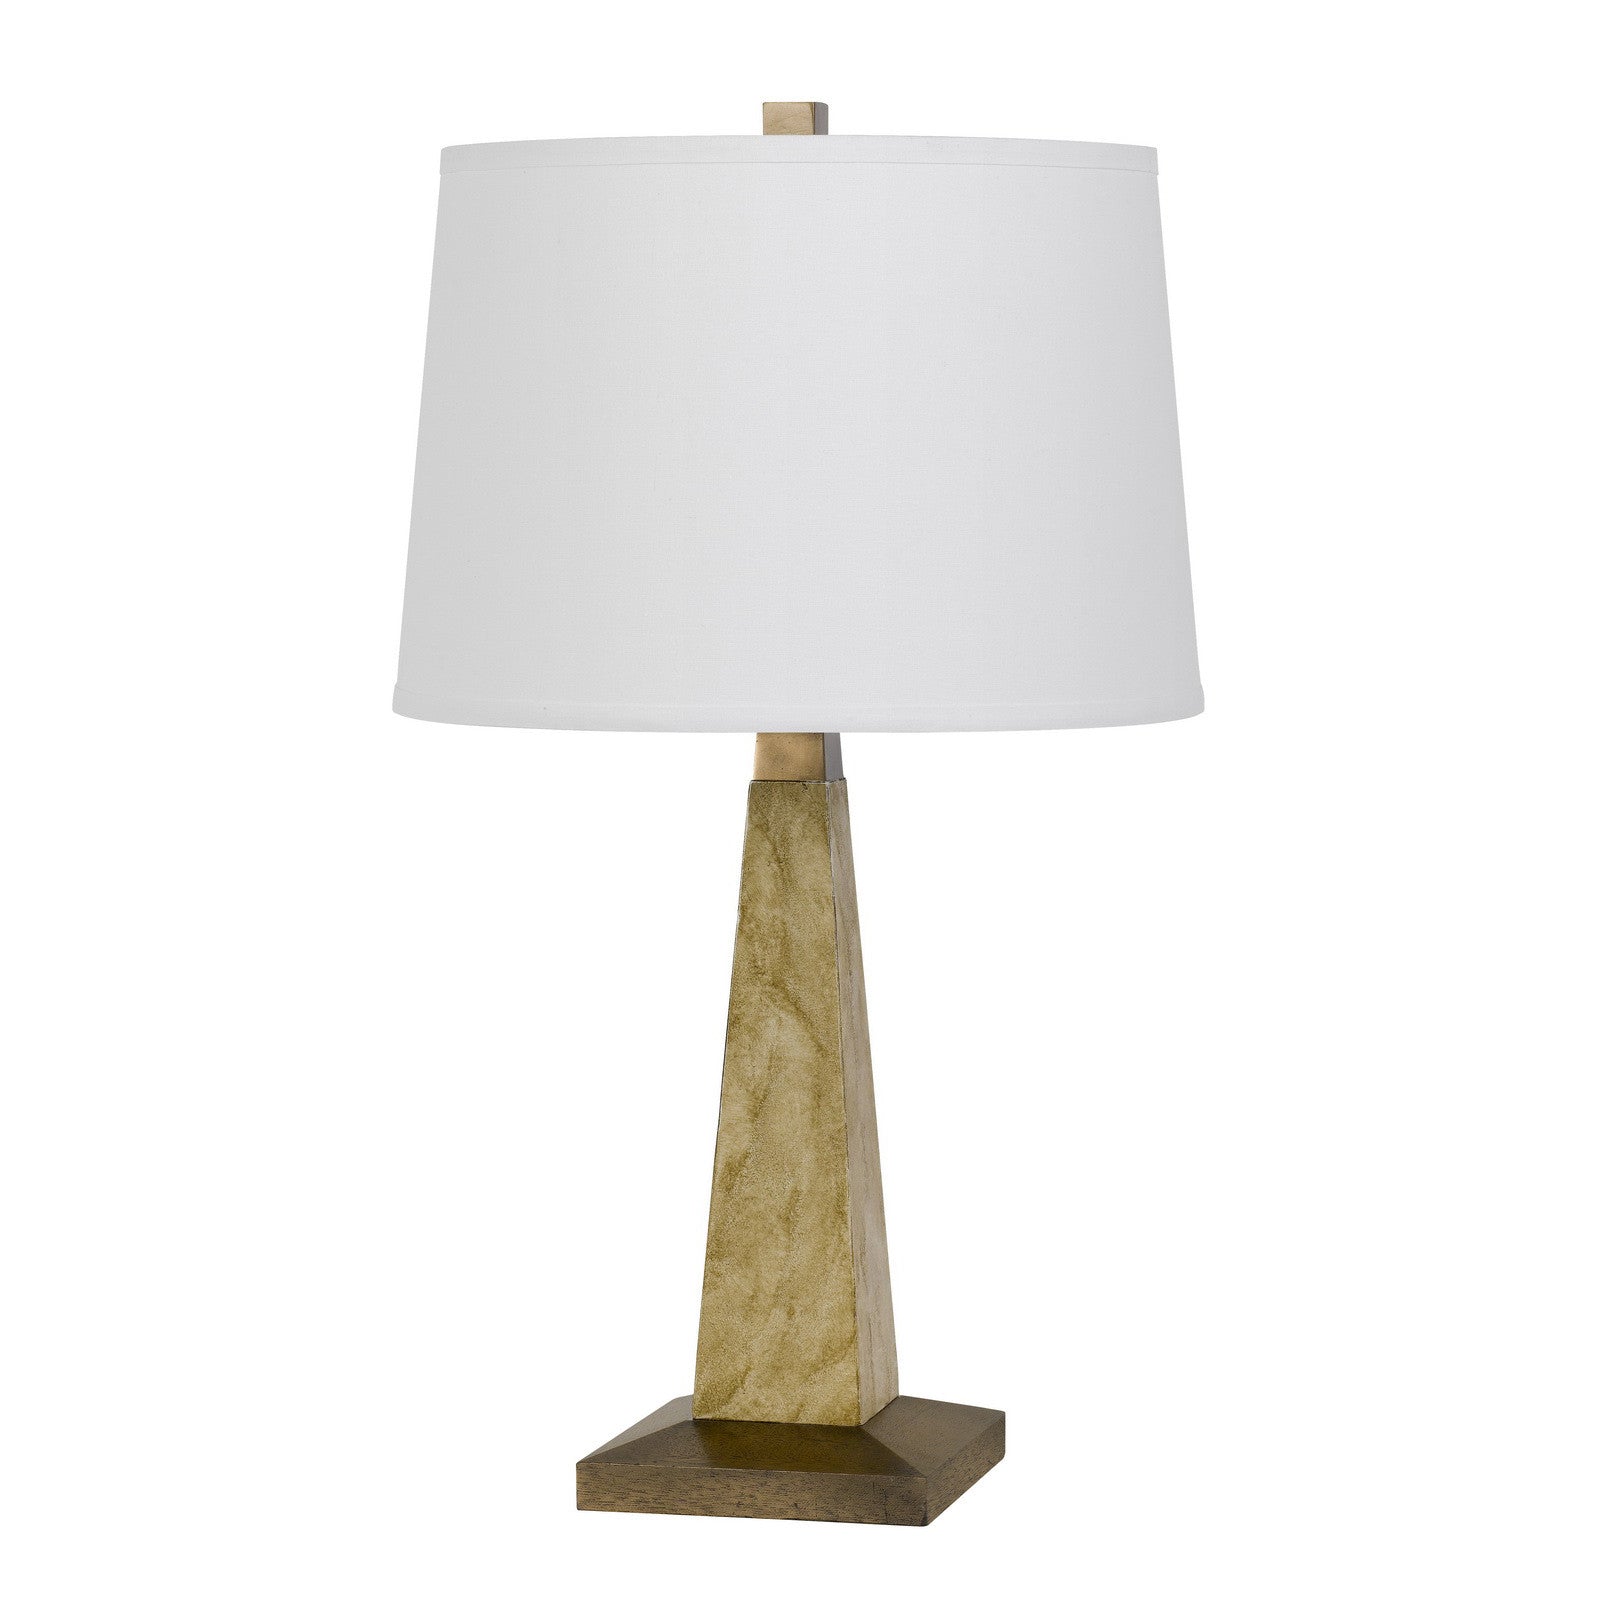 28" Brown Table Lamp With Off White Empire Shade